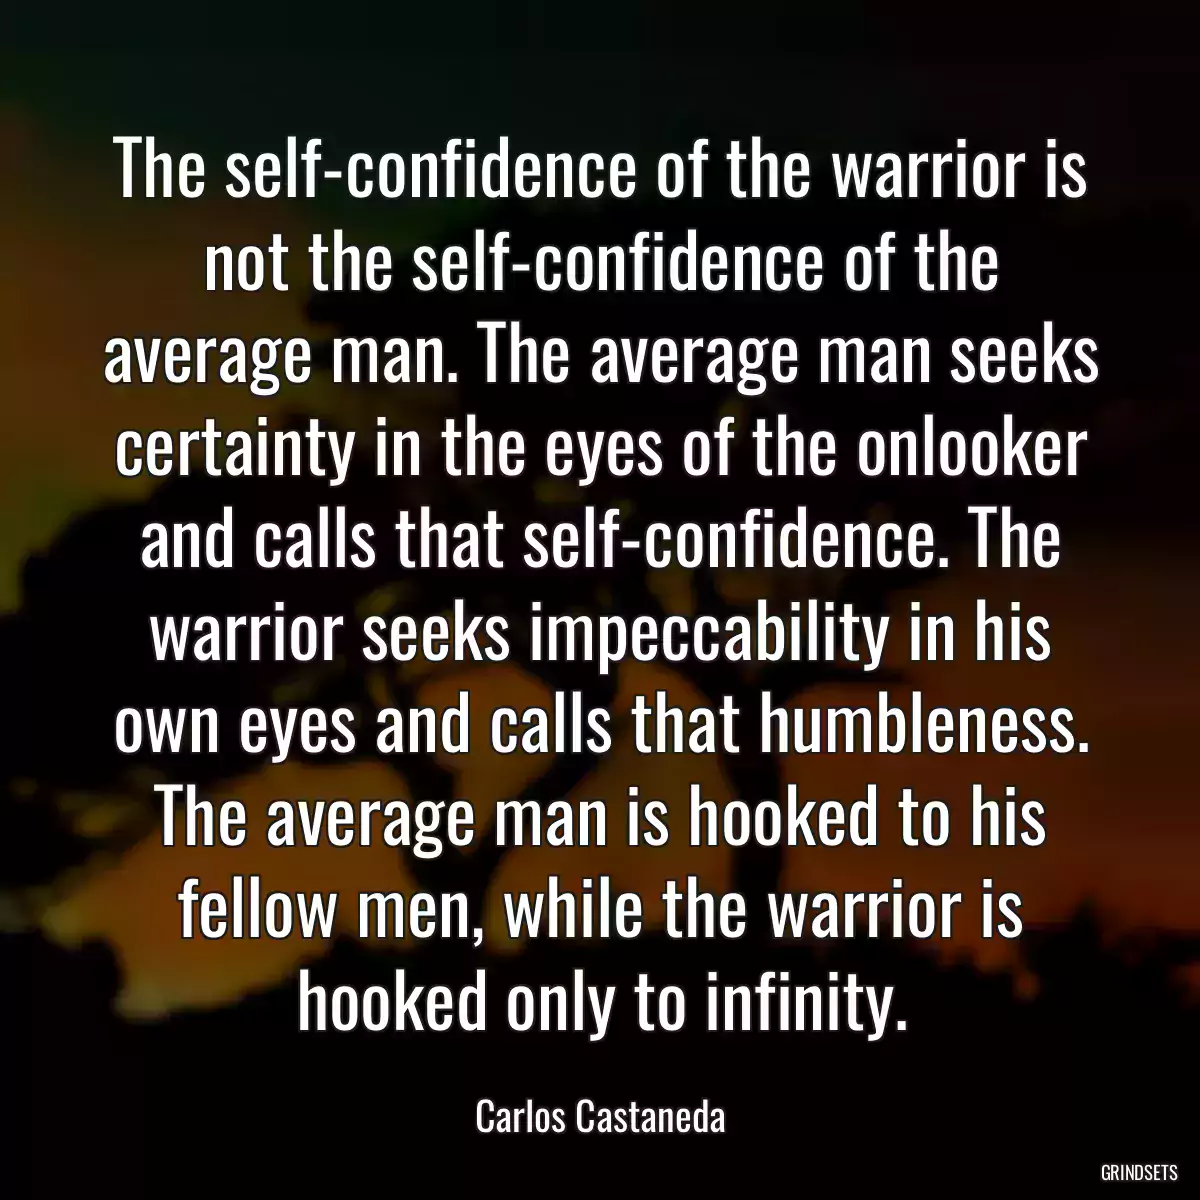 The self-confidence of the warrior is not the self-confidence of the average man. The average man seeks certainty in the eyes of the onlooker and calls that self-confidence. The warrior seeks impeccability in his own eyes and calls that humbleness. The average man is hooked to his fellow men, while the warrior is hooked only to infinity.